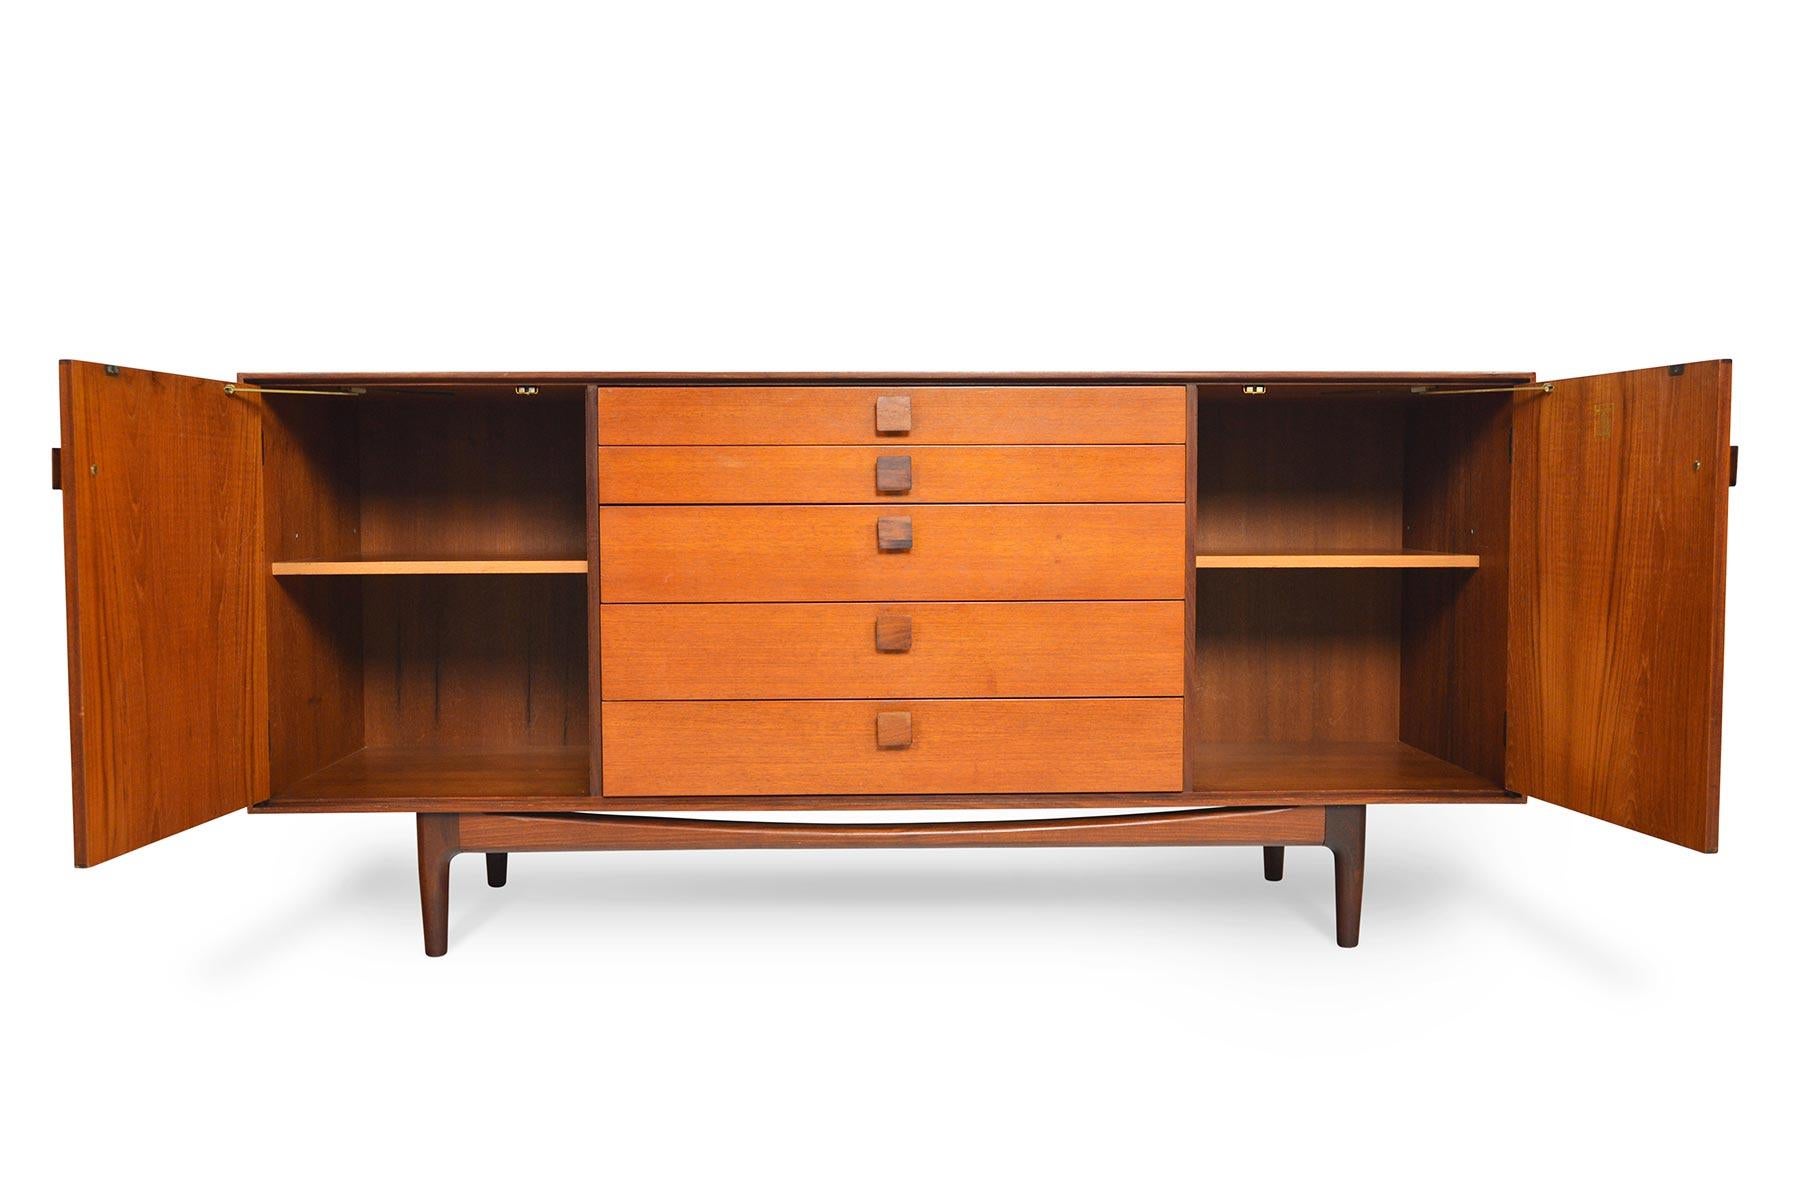 This medium midcentury teak credenza was designed by Ib Kofod Larsen for G Plan in 1961 for the Danish Range. Crafted in teak and afrormosia with handsomely refined lines, two wide doors open to reveal two bays with adjustable shelving. A bank of